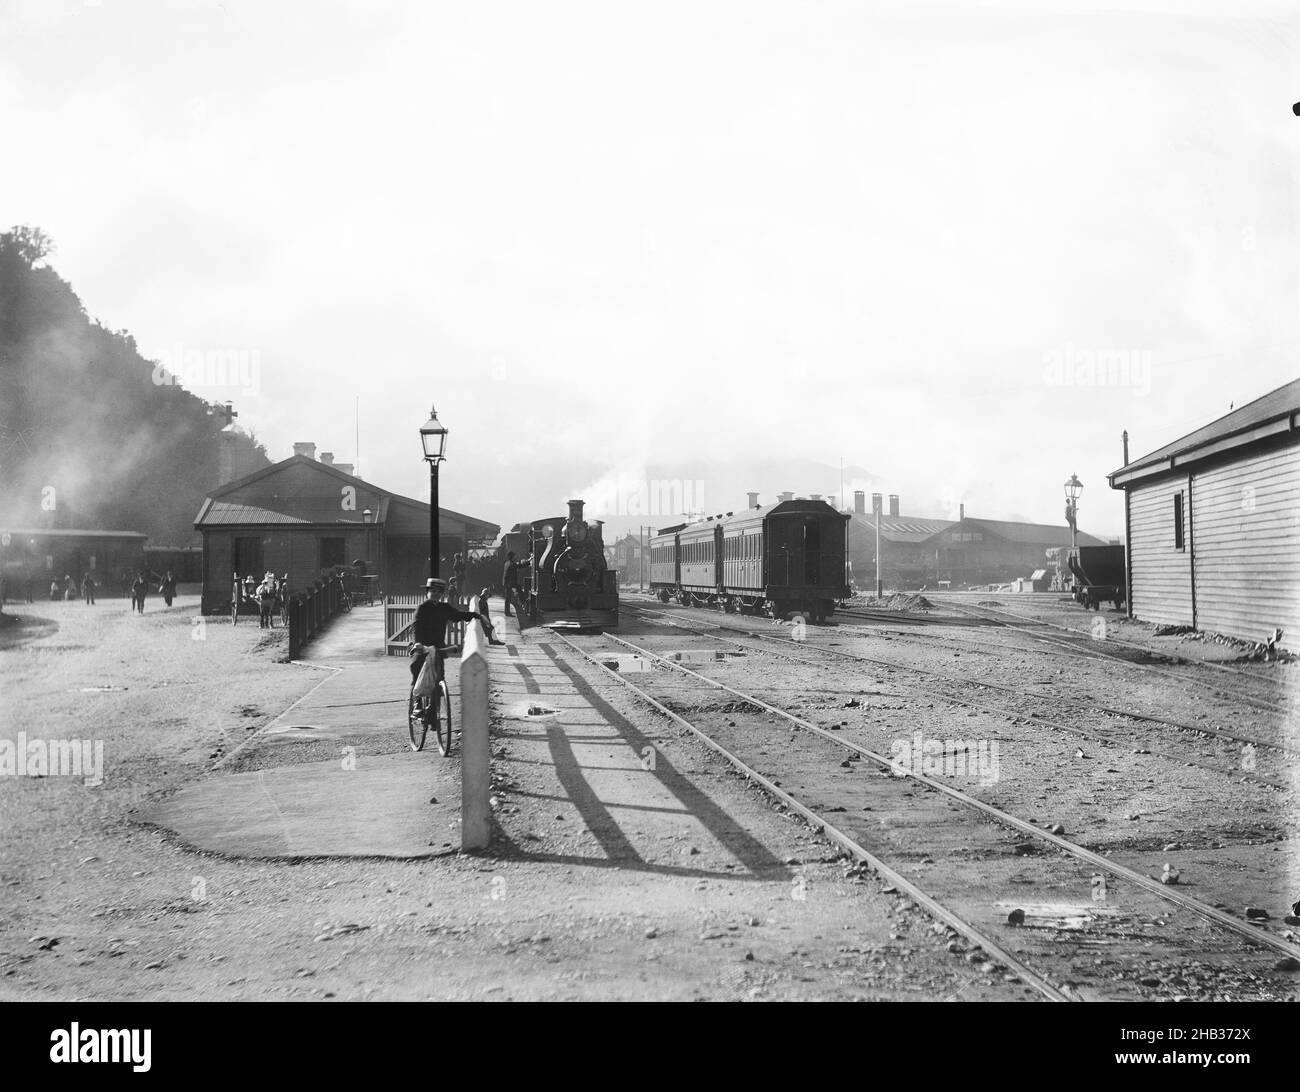 [Greymouth Railway Station], Muir & Moodie studio, photography studio, New Zealand, Greymouth Railway Station taken from the Hokitika end of the main platform. In the left background a train has recently arrived at the Riverside platform and the disembarked passengers are walking across the intersection of Mackay Street and Mawhera Quay. On the right, in the background behind the carriages, are the old Greymouth engine sheds which were demolished around 1929. The shed, right foreground, was also demolished prior to 1969 Stock Photo